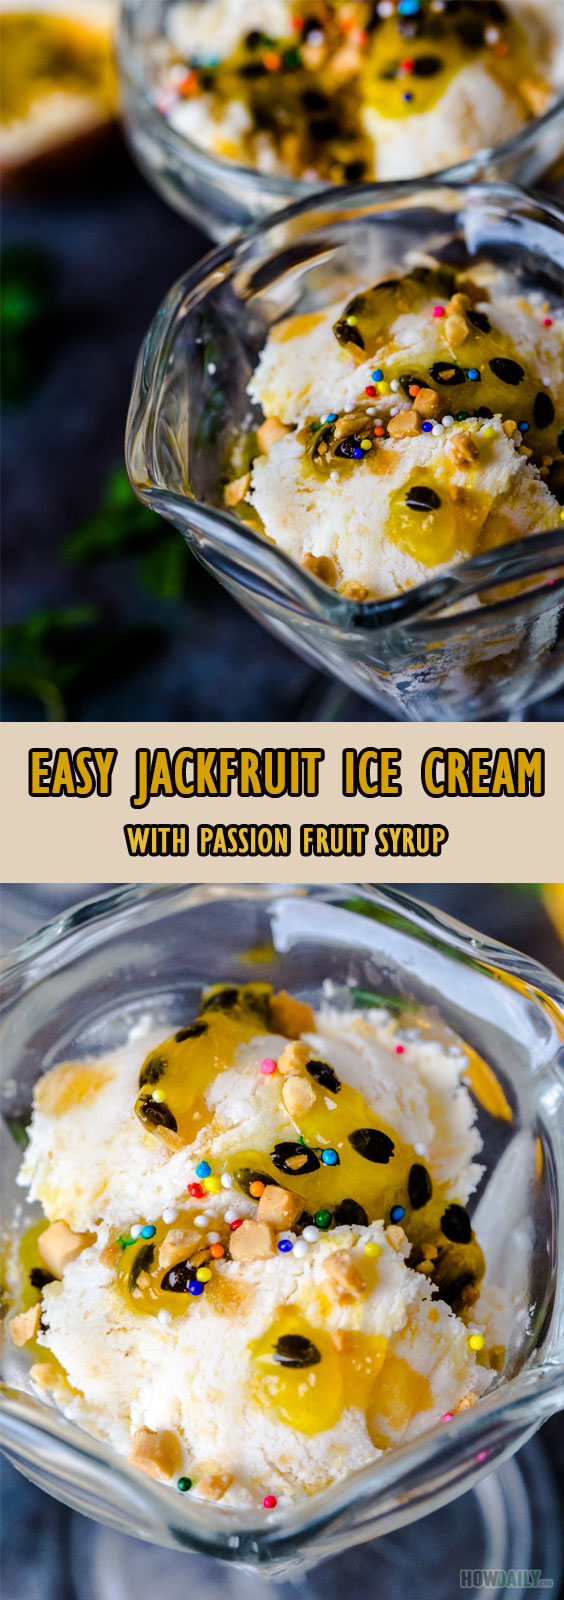 Easy no-churn Jackfruit Ice Cream with Passion Fruit Syrup